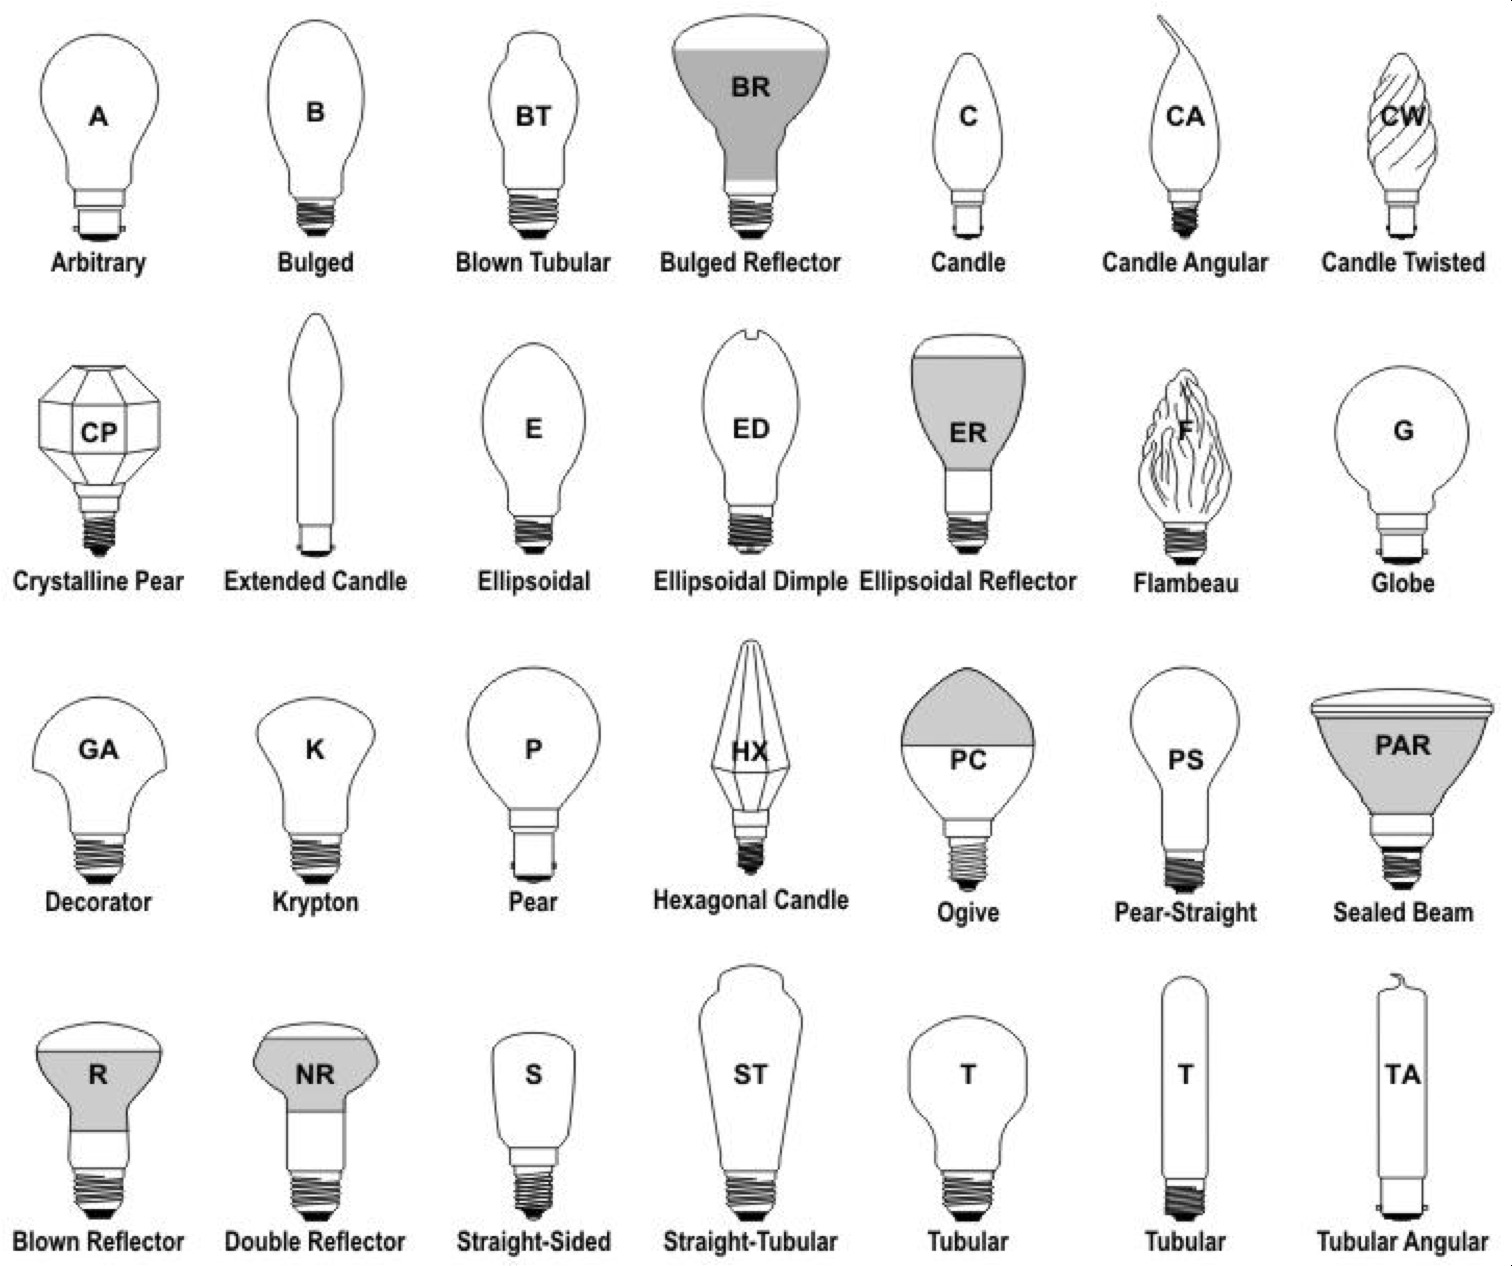 Naming Conventions for Light Bulb Shapes-Made-in-China.com